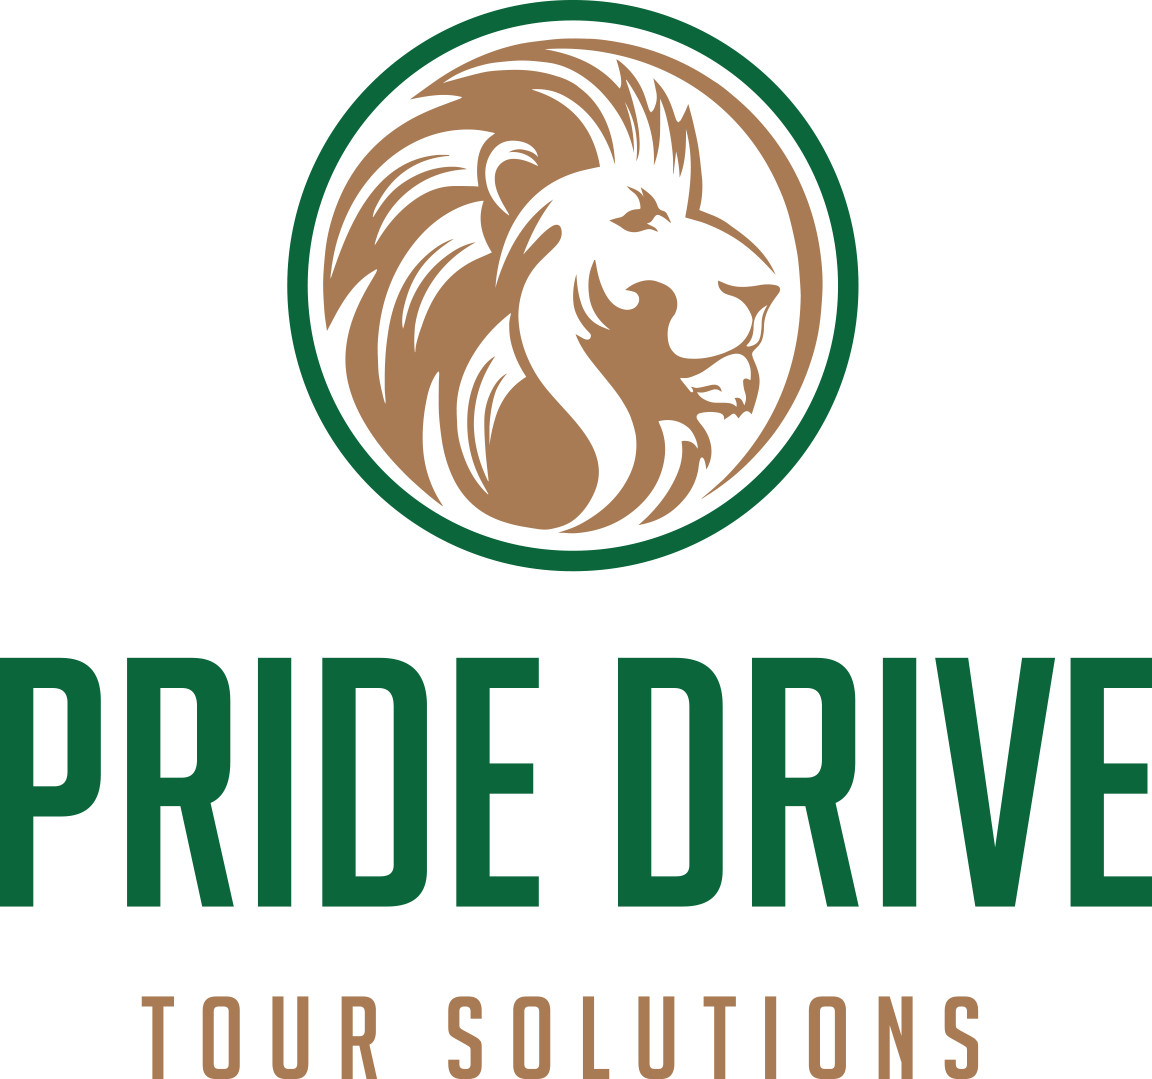 Pride Drive Tour Solutions Limited | Cape Town Hollow Boutique Hotel 4* - Pride Drive Tour Solutions Limited